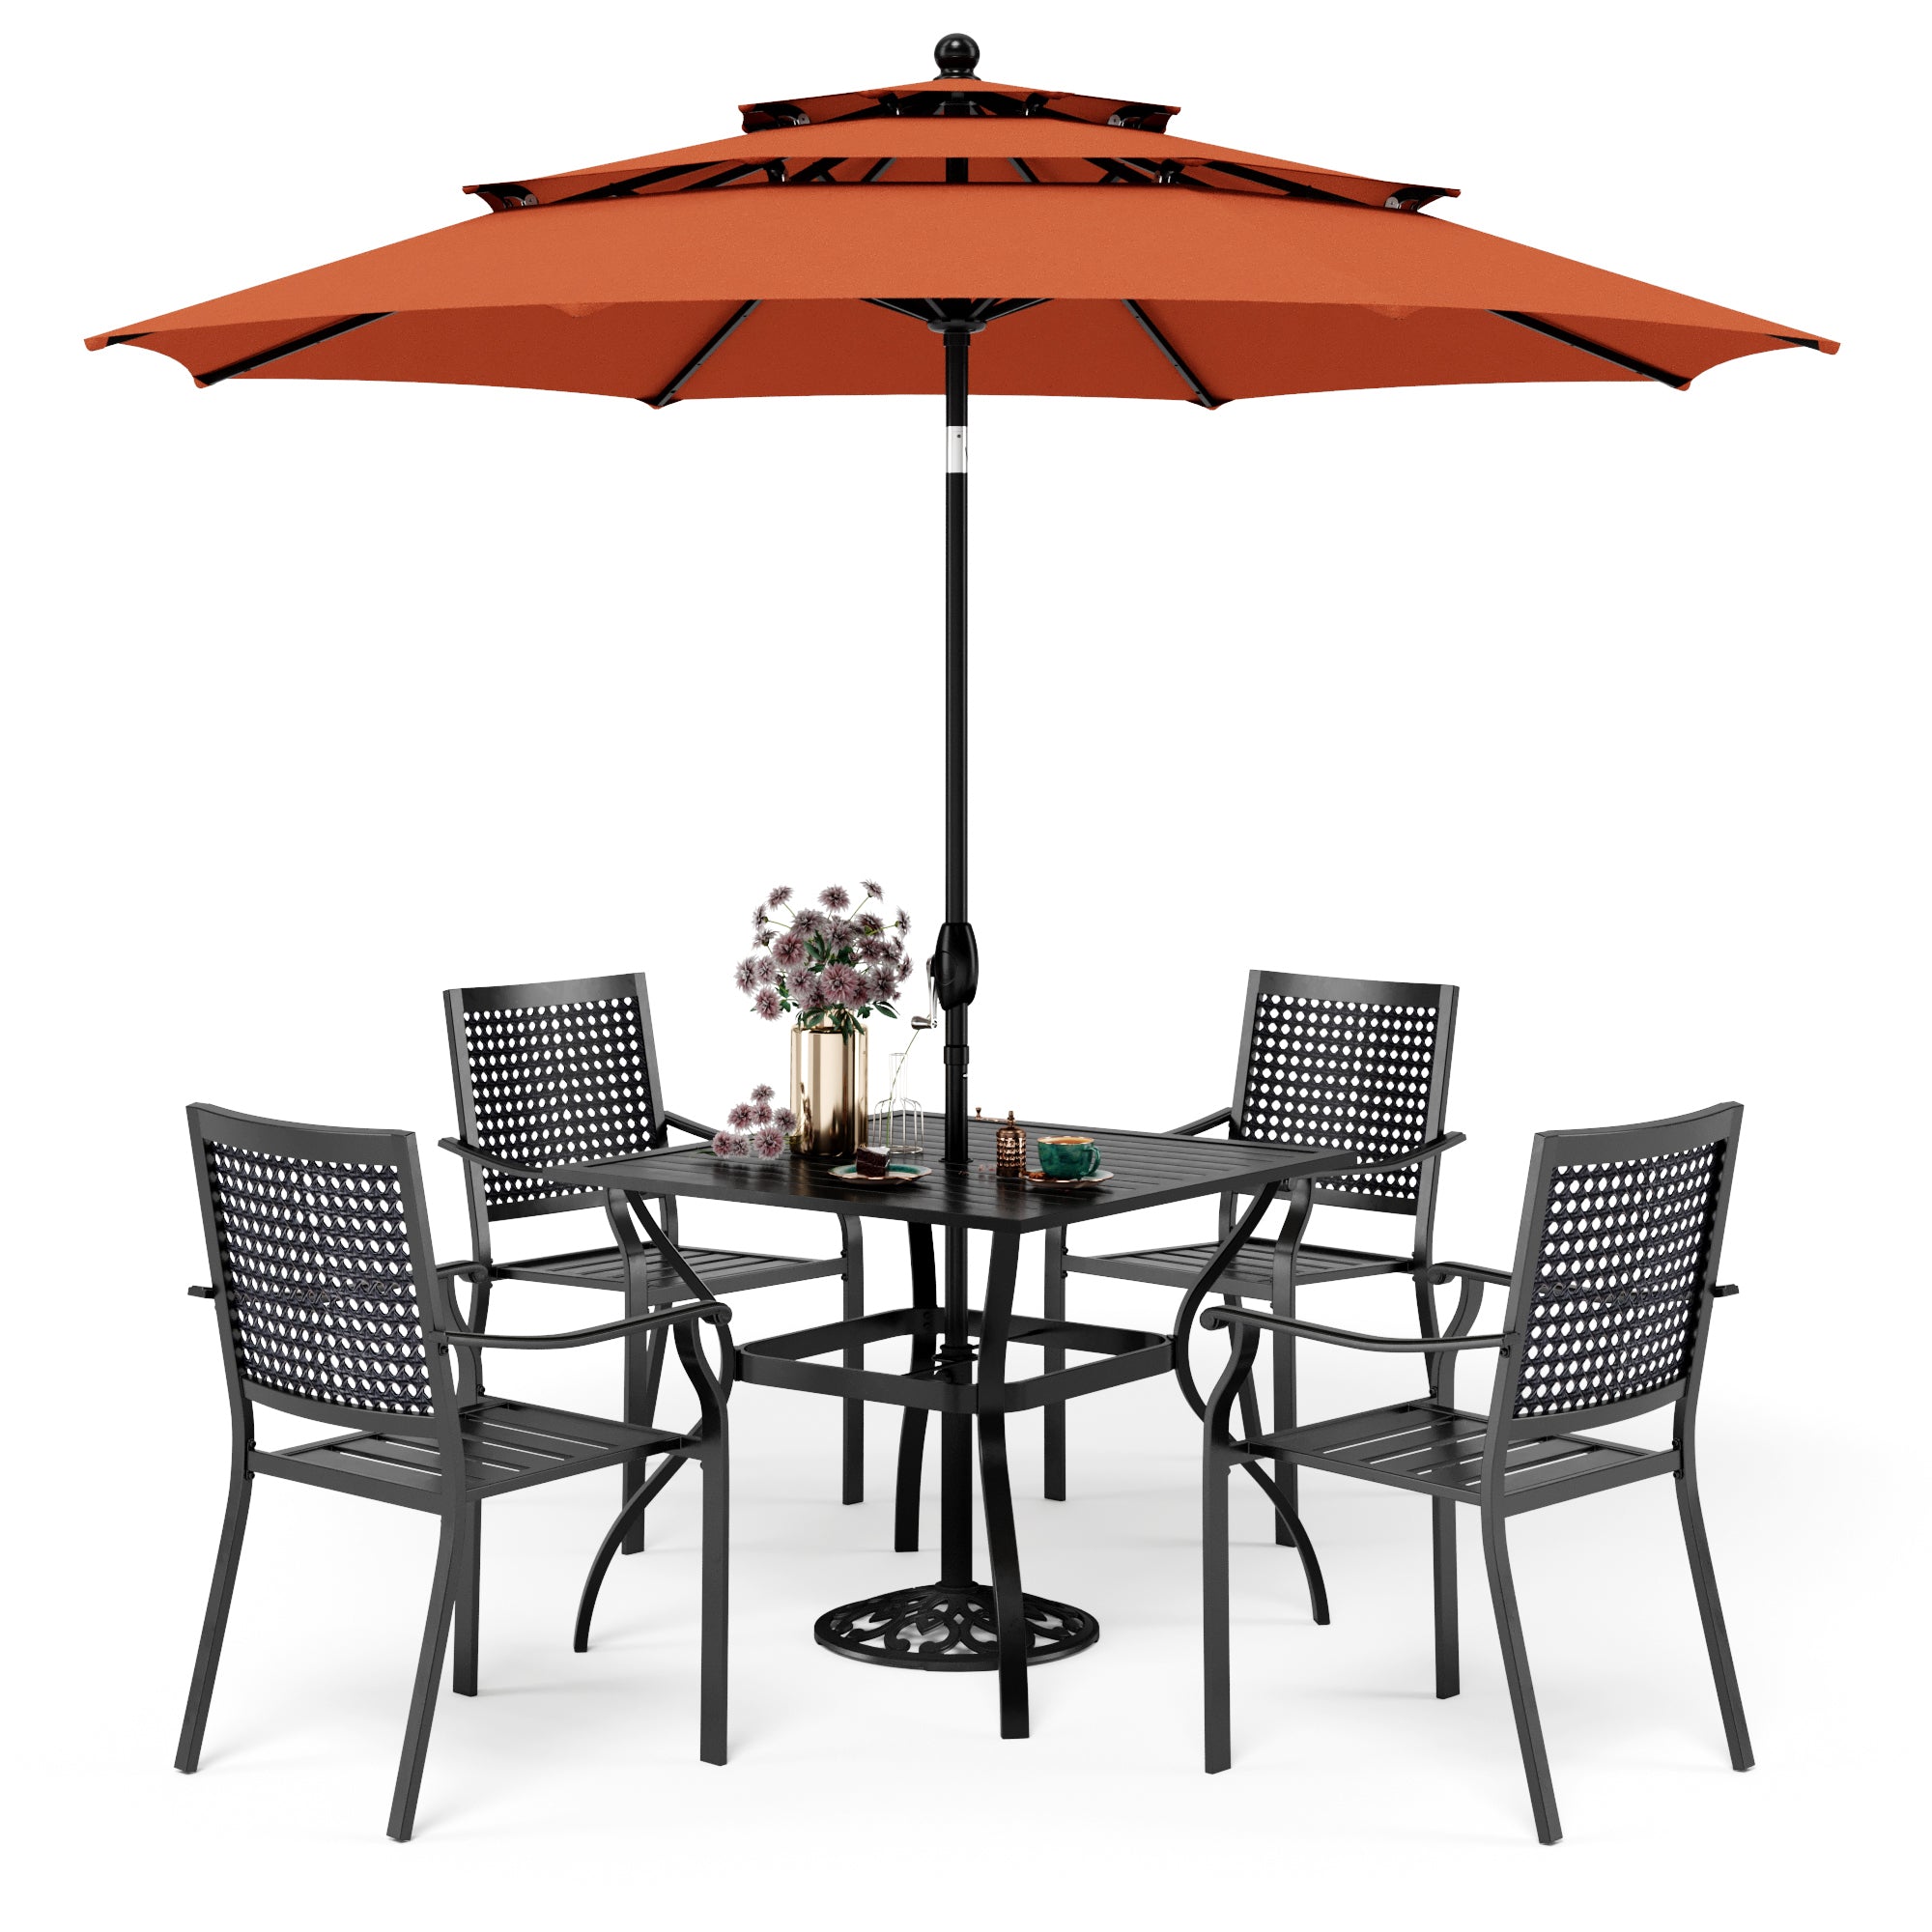 MFSTUDIO 6-Piece Outdoor Dining Set with Umbrella Steel Square Table & Bull's Eye Pattern Dining Chairs